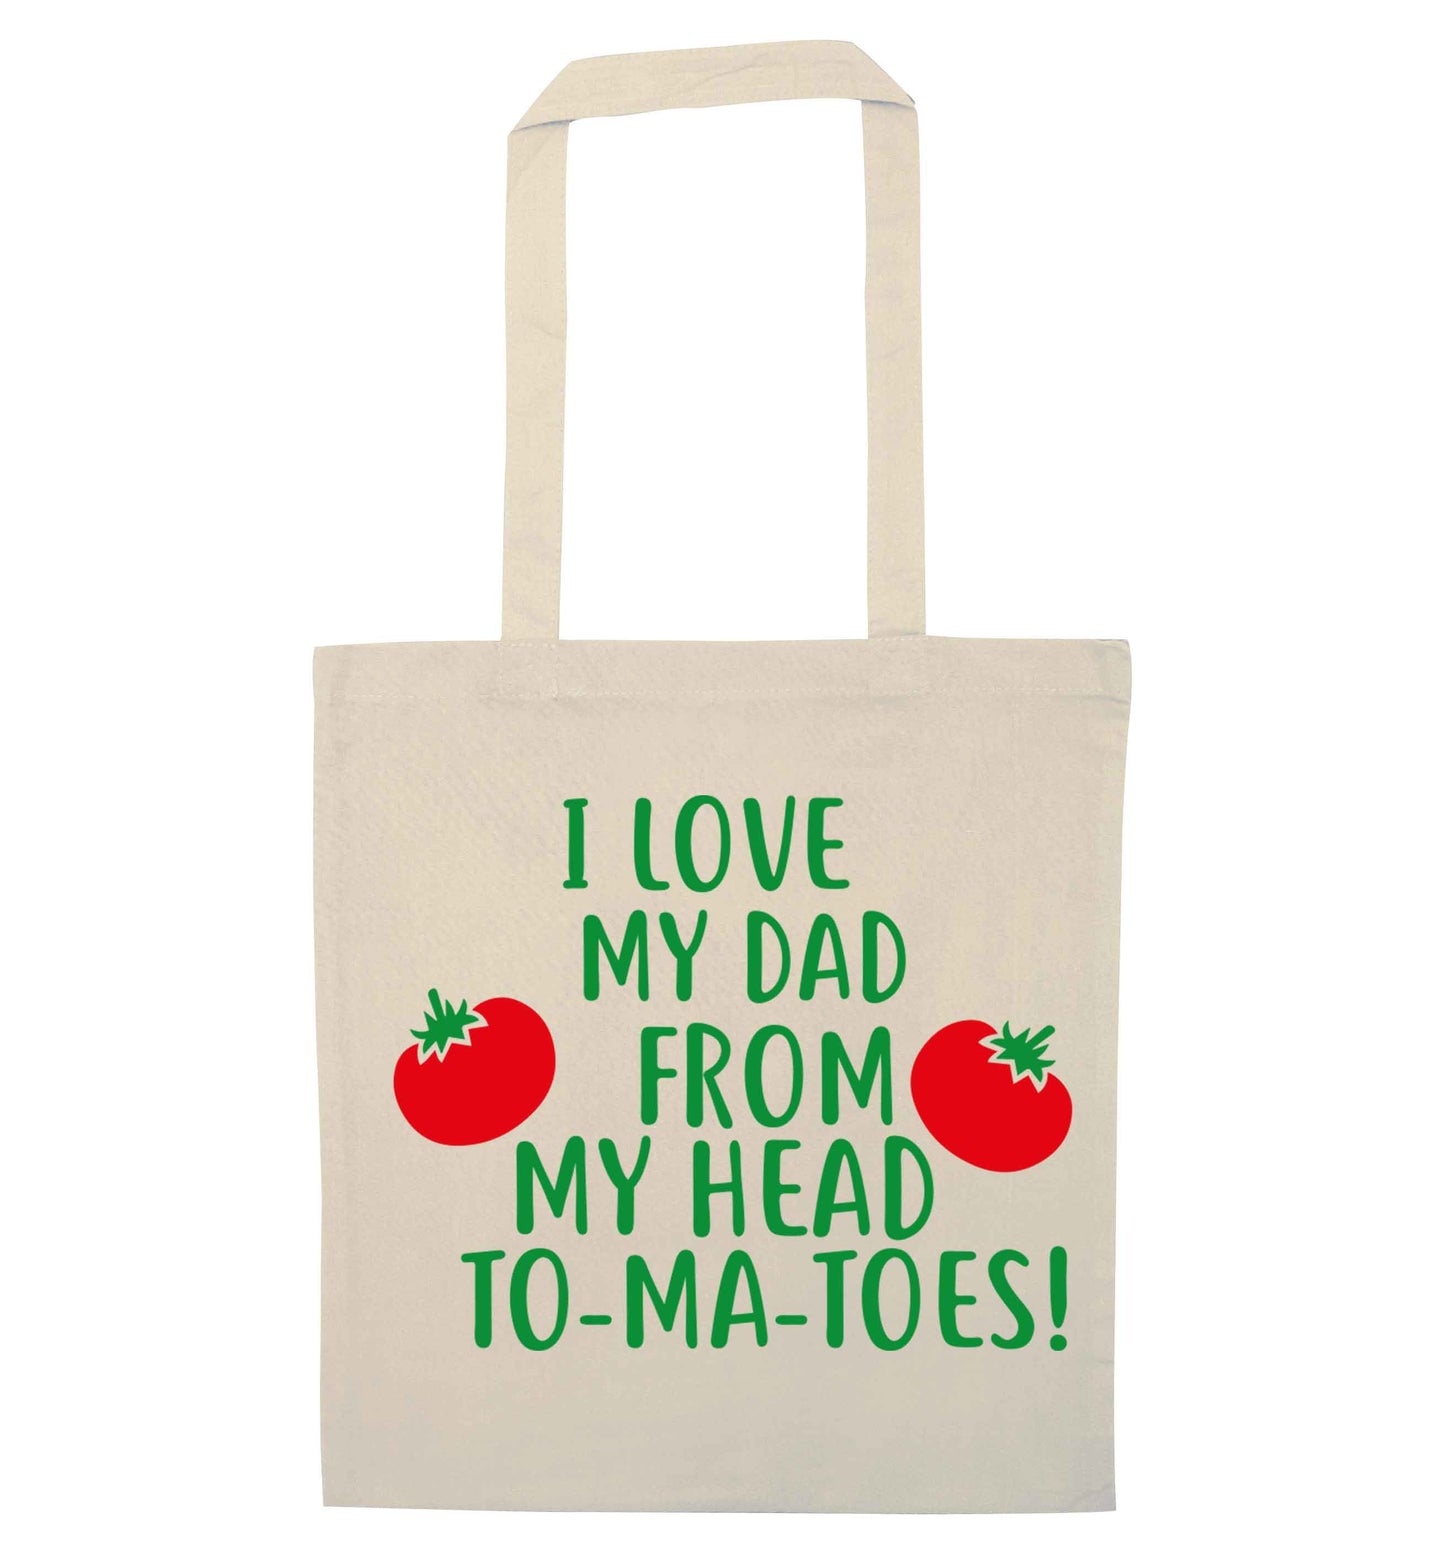 I love my dad from my head to-ma-toes natural tote bag